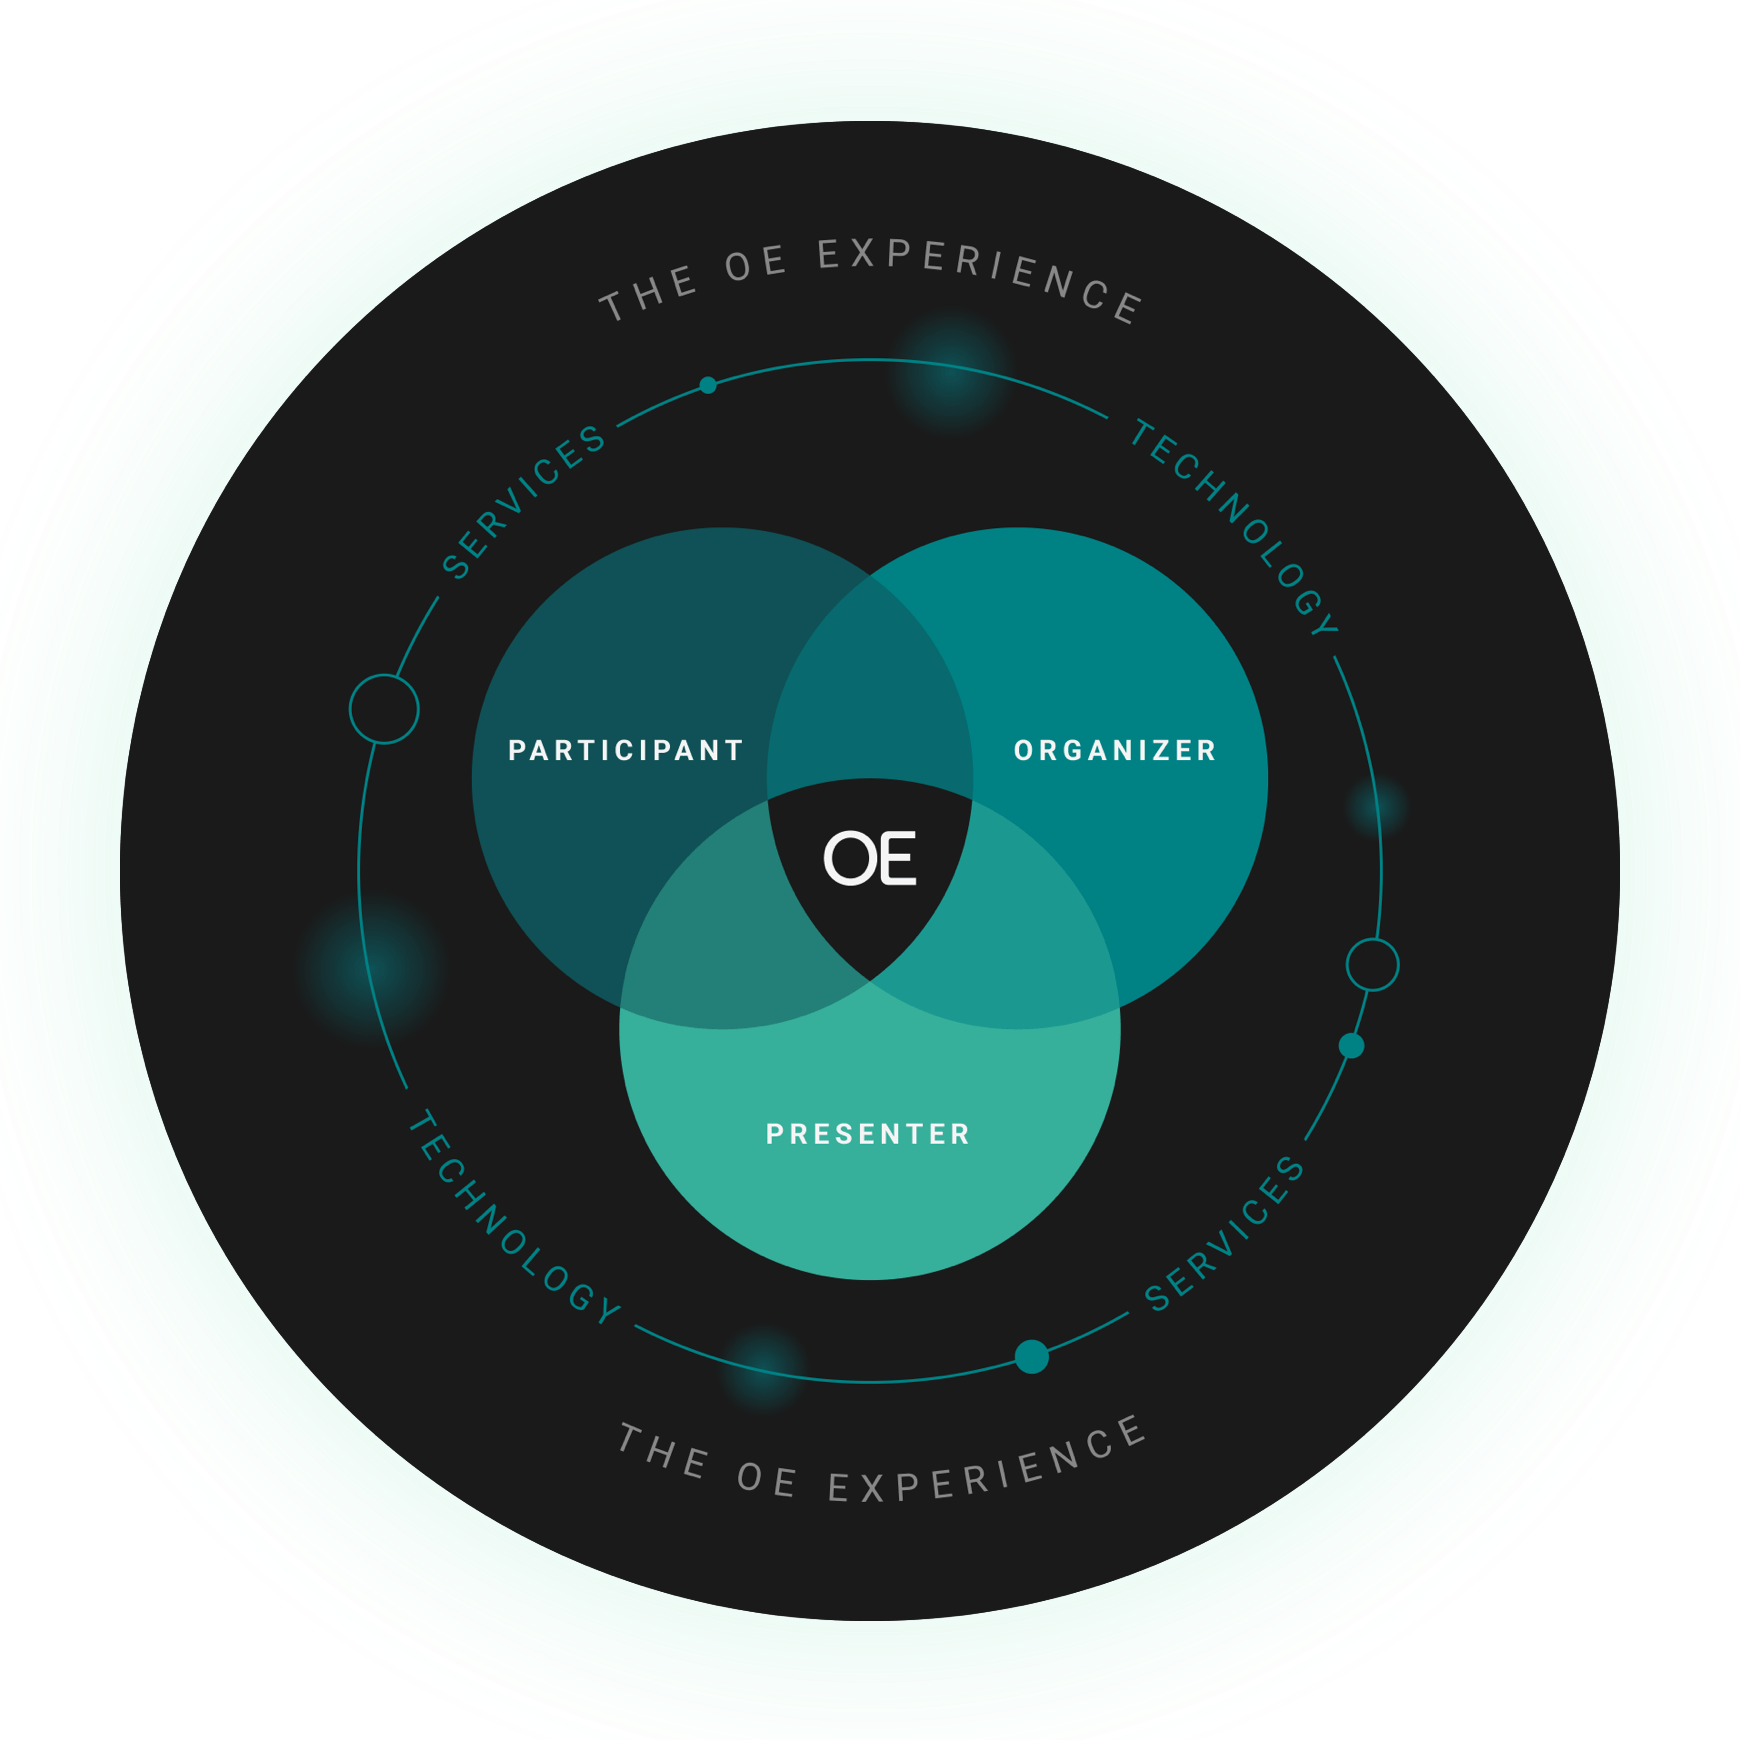 The OE Experience Wheel. Technology surrounding Participant, Presenter and Organizer.